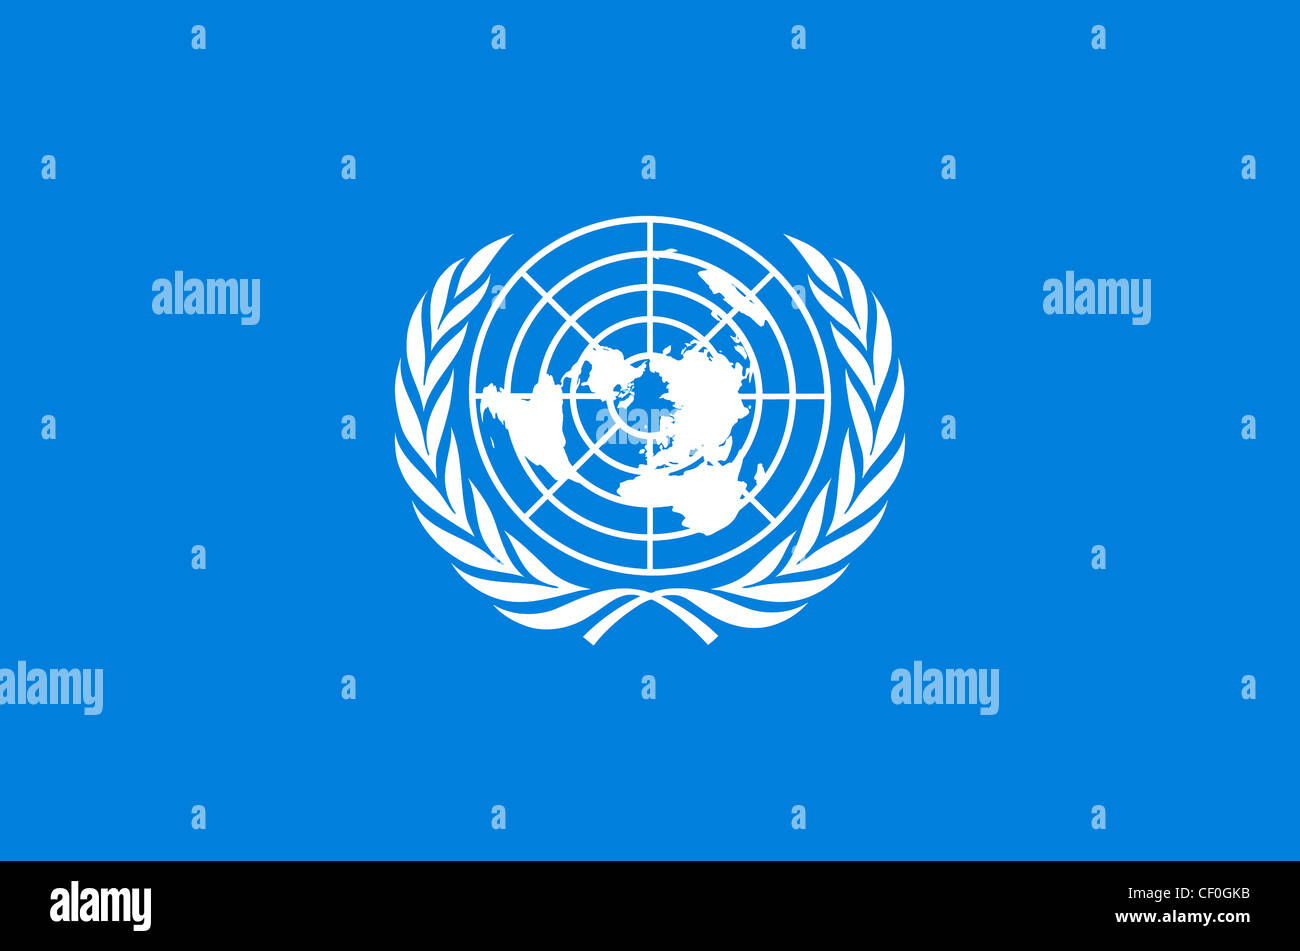 Flag of the United Nations with the coat of arms of the organization. Stock Photo